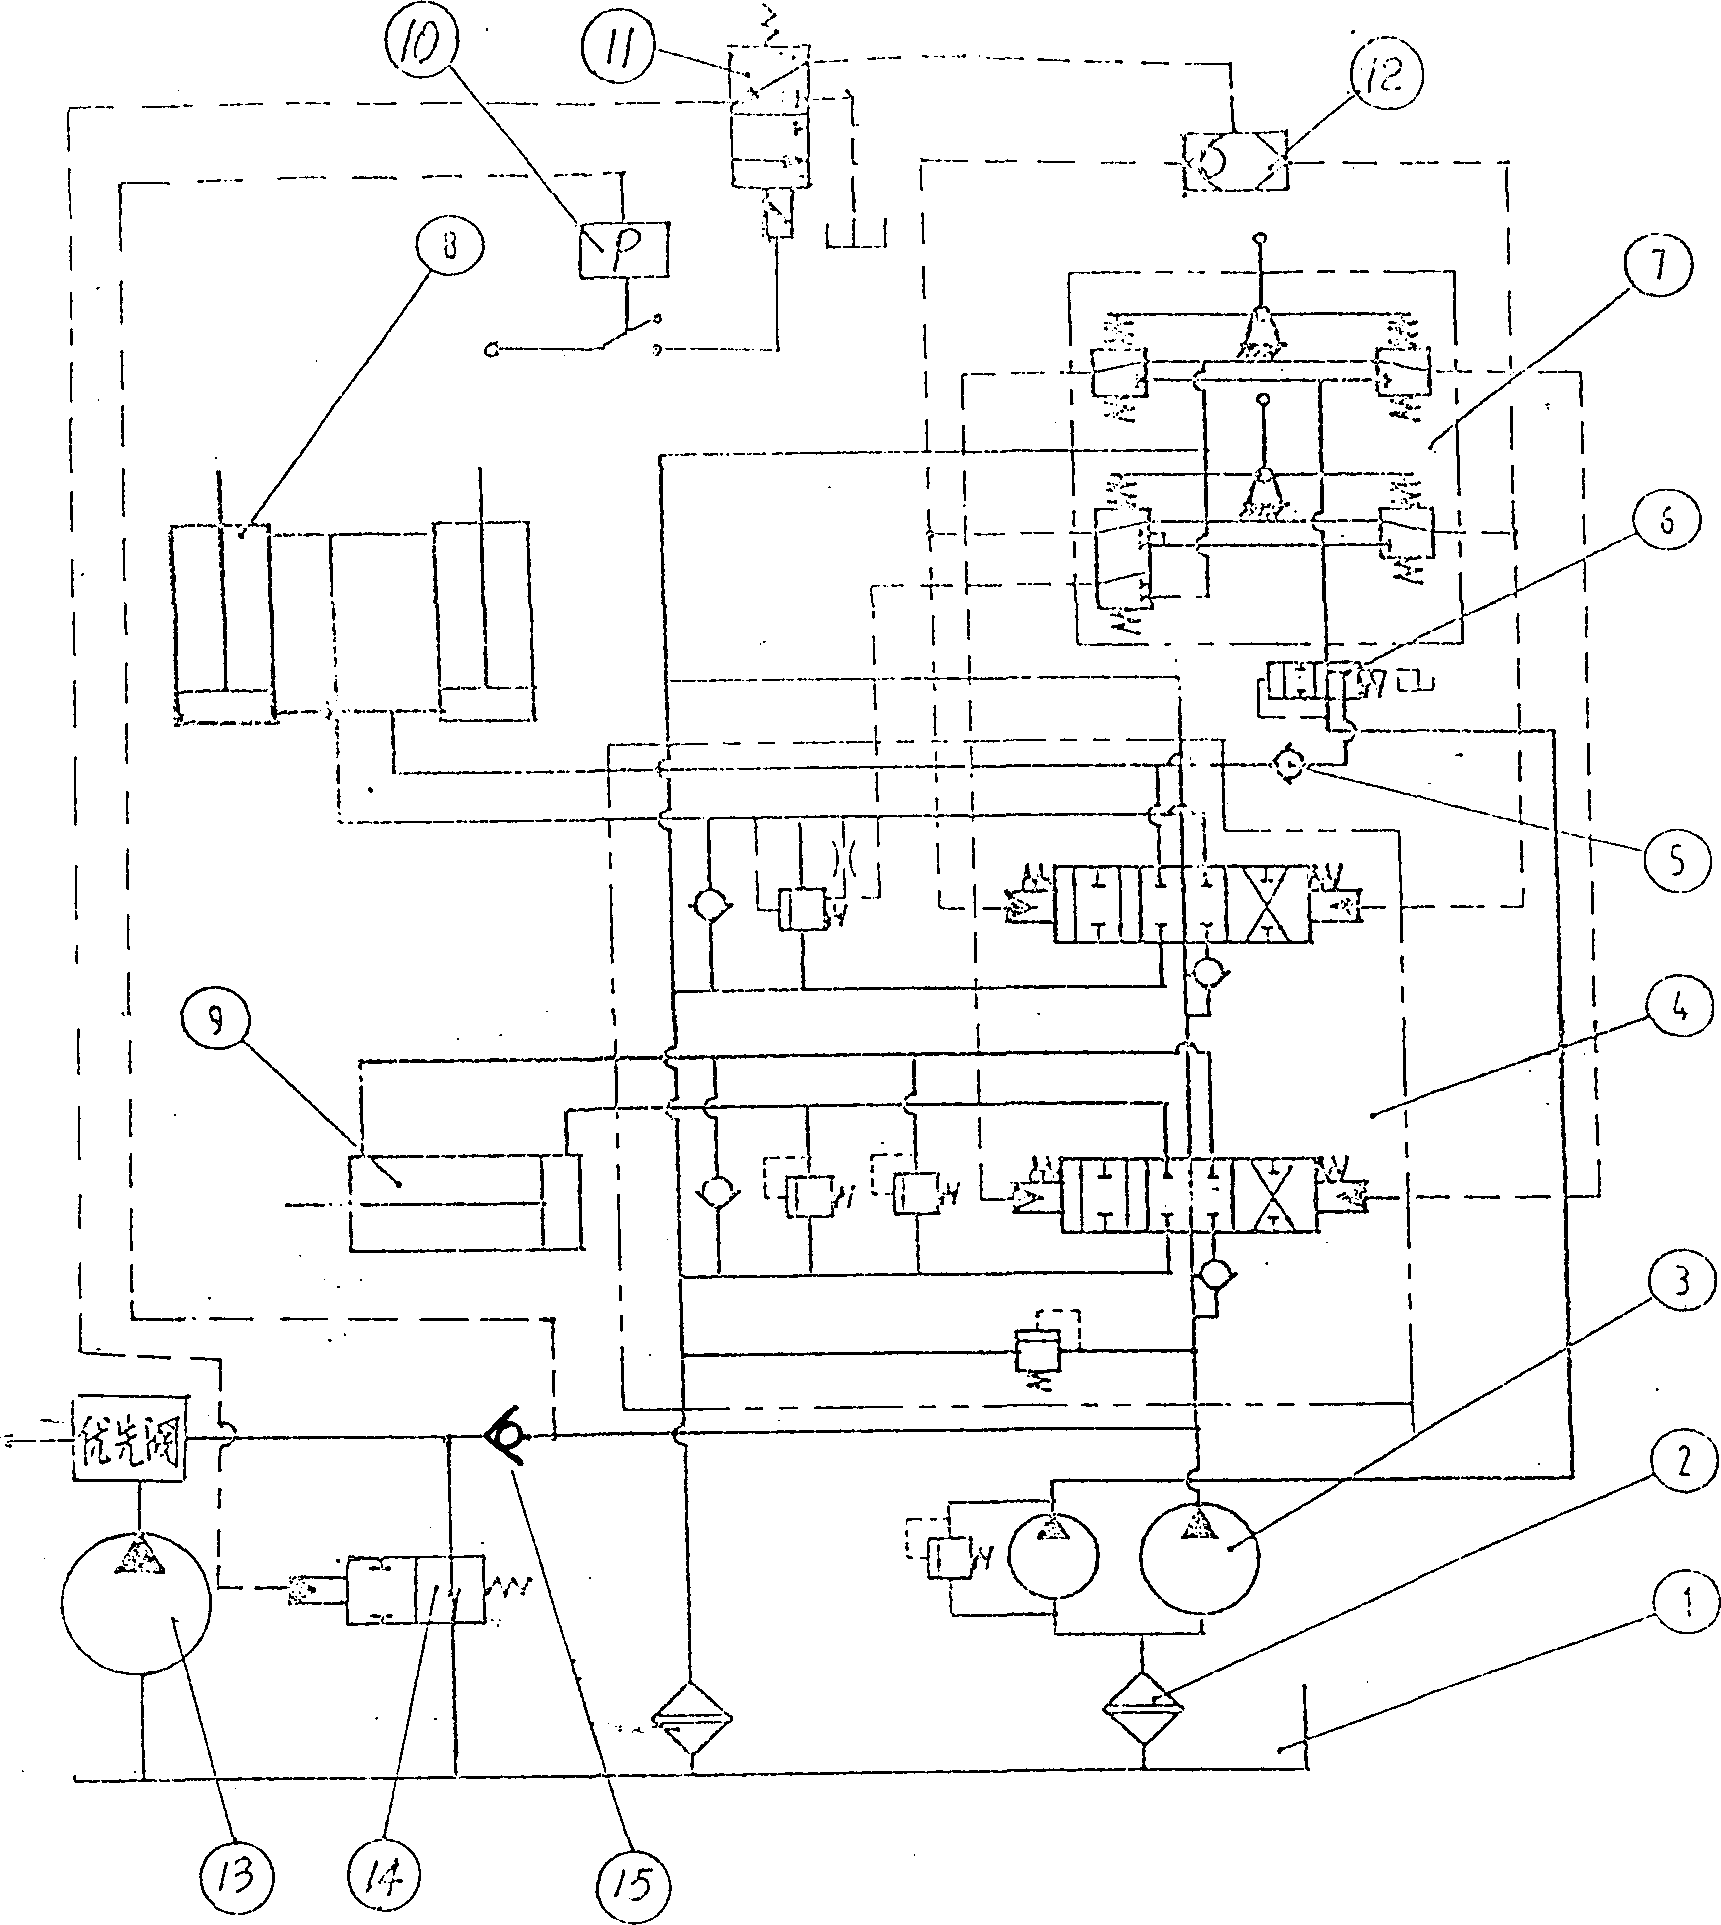 Current associating and unloading control method for multiple-pump hydraulic system